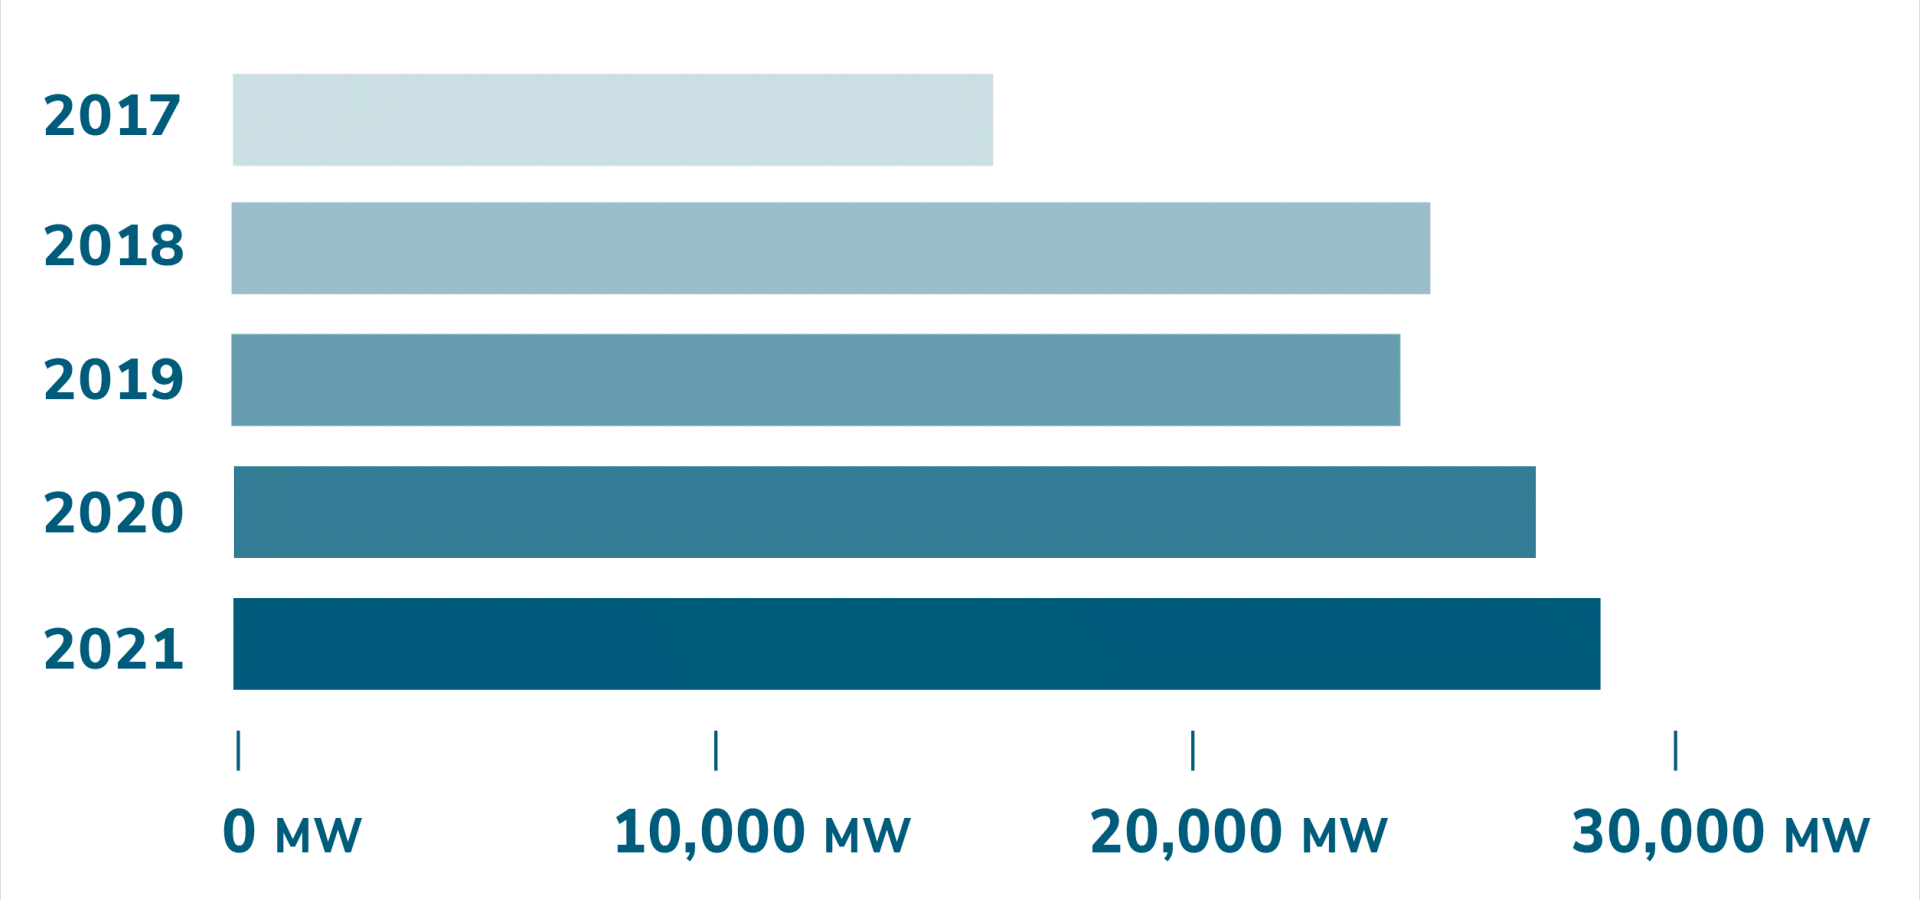 Bar chart measuring TMV’s exclusive fuel supply capacity managed between the years 2017 and 2021, measured in megawatts. 2021 shows the highest capacity managed with 28,693 MW.